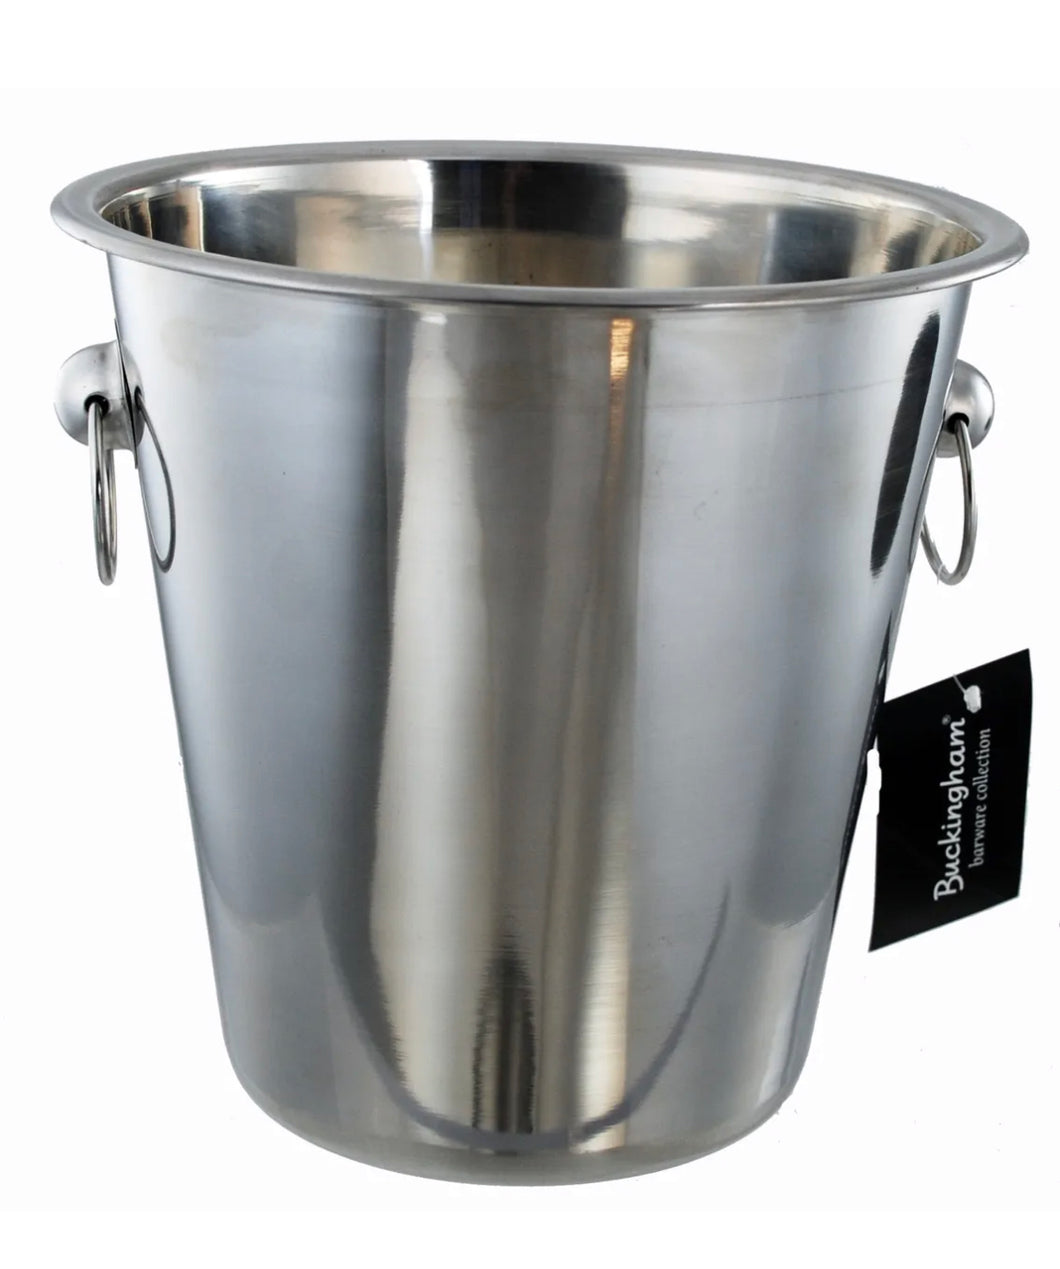 Stainless Steel Silver Champagne Wine Bucket Ice Cooler